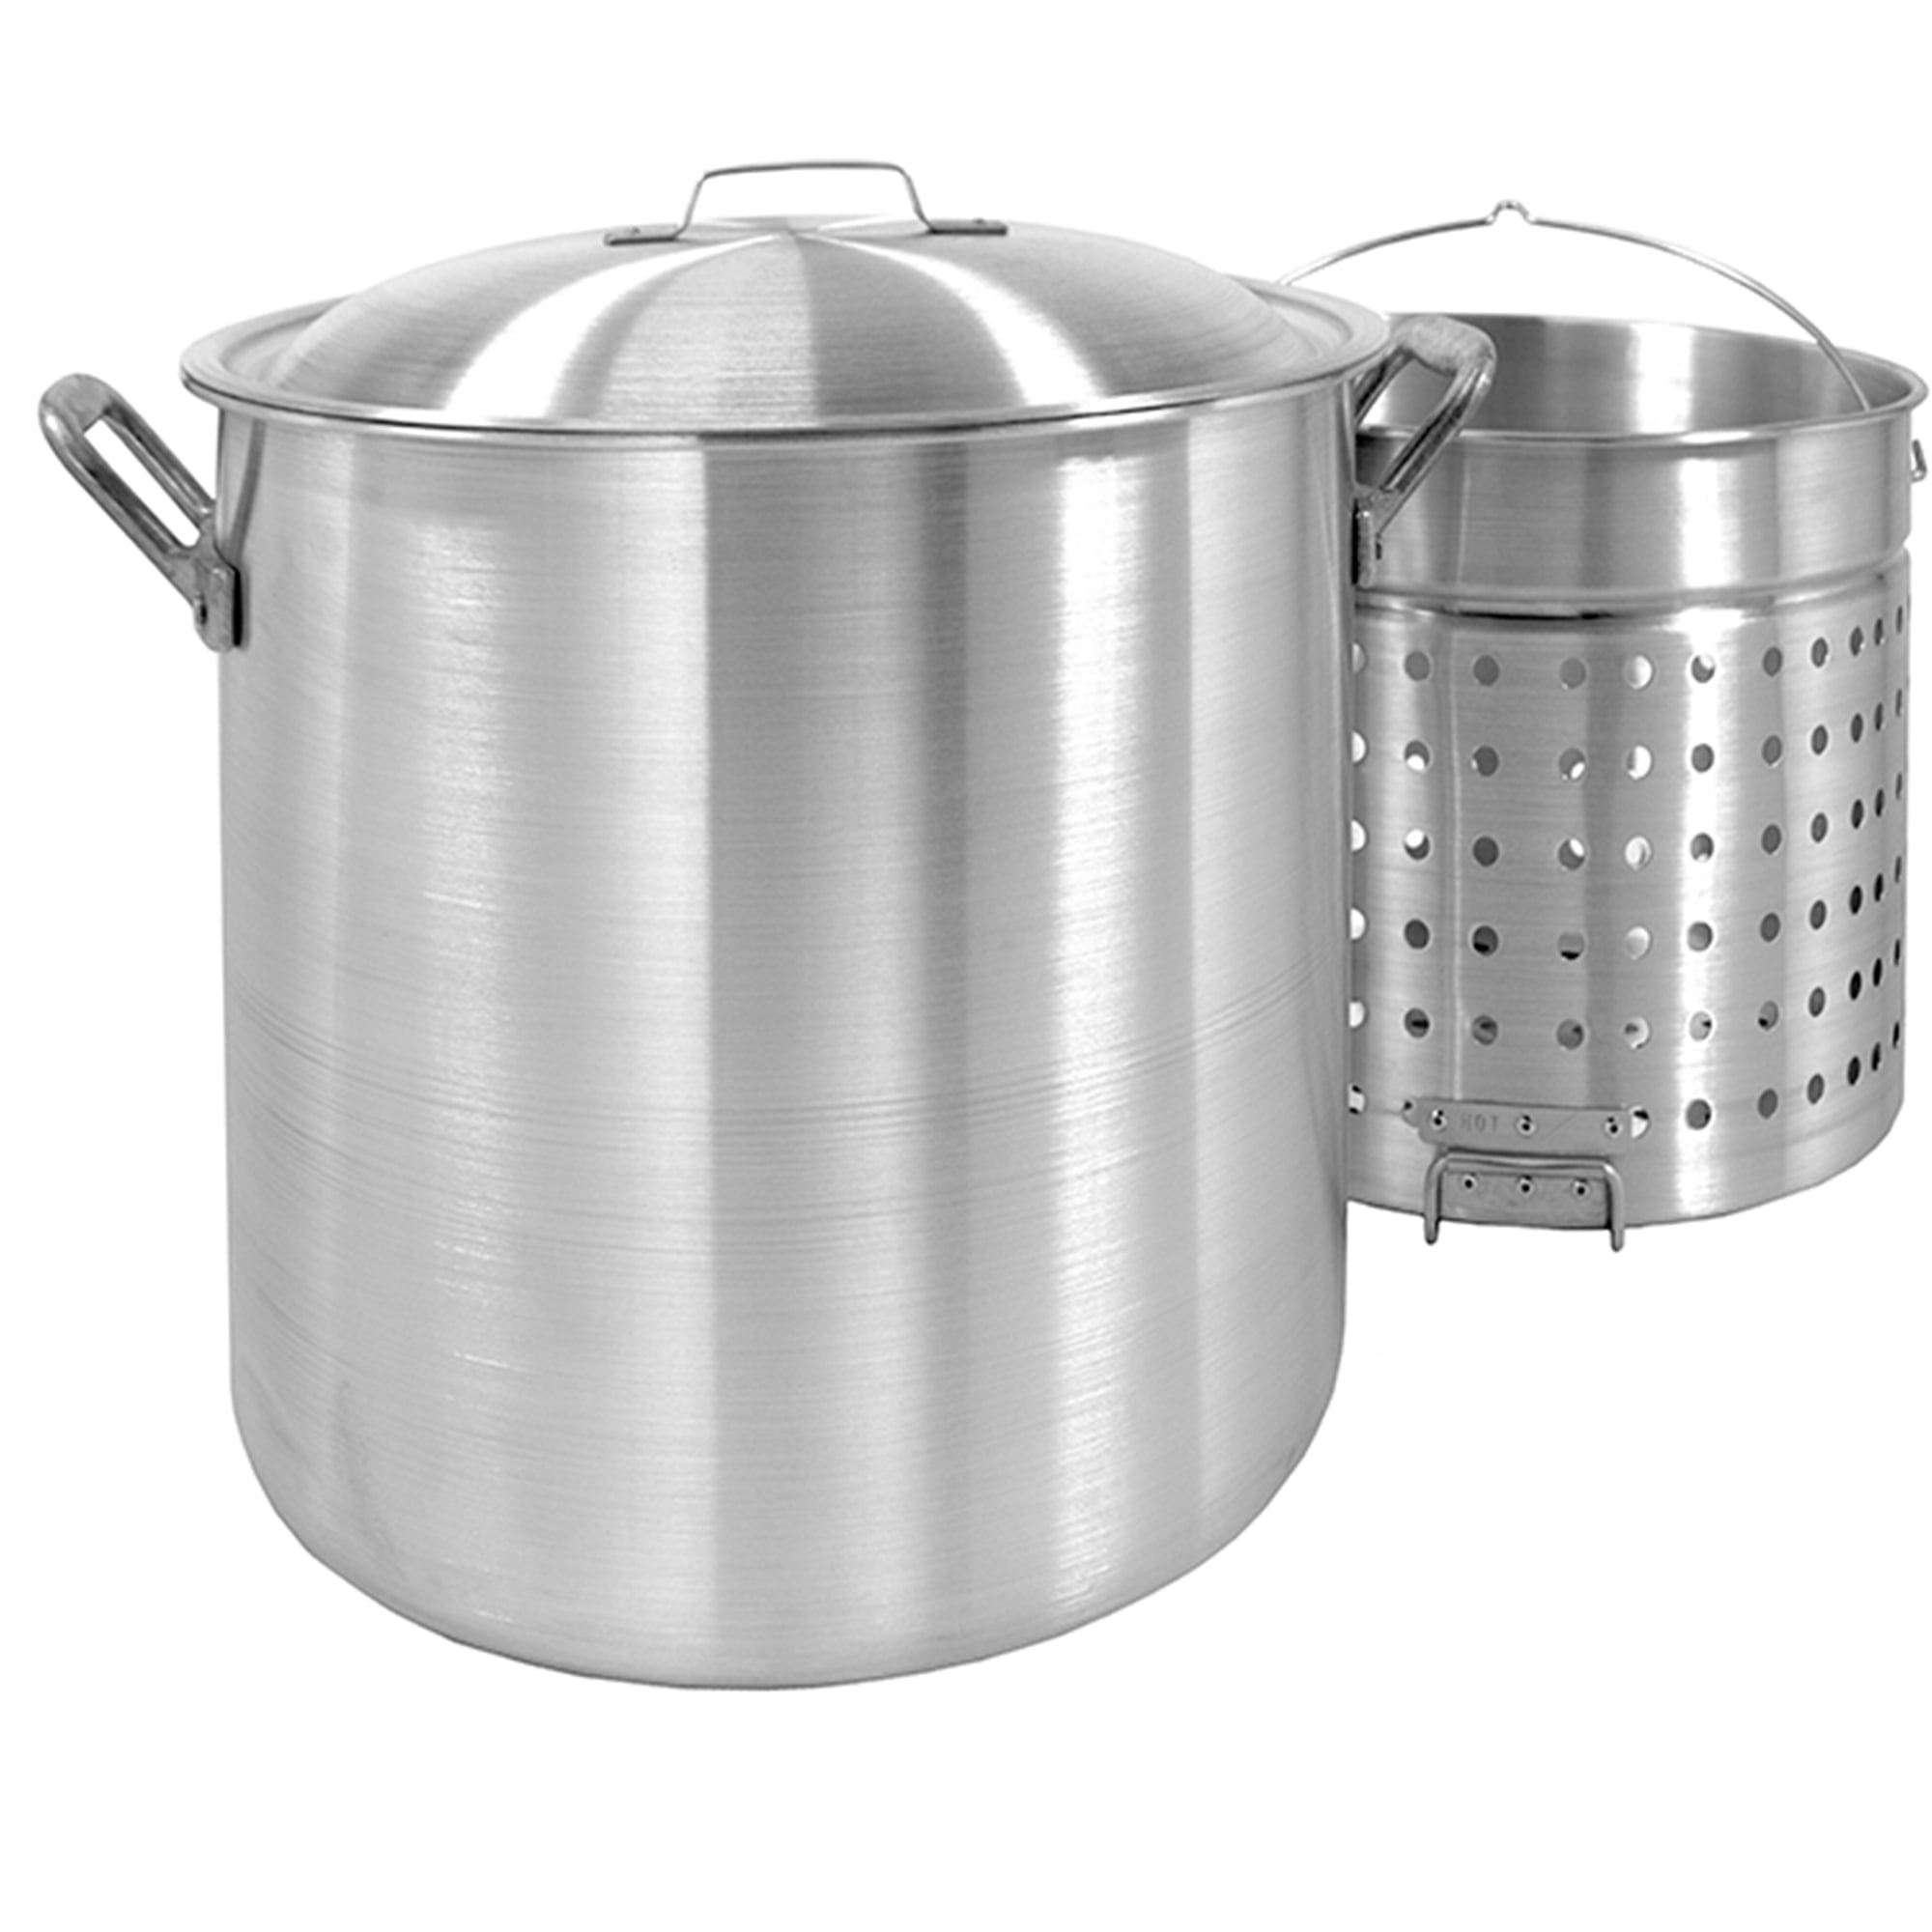 Lehman's Amish Made Stainless Steel Stovetop Water Bath Canner Stockpot 50 Quart